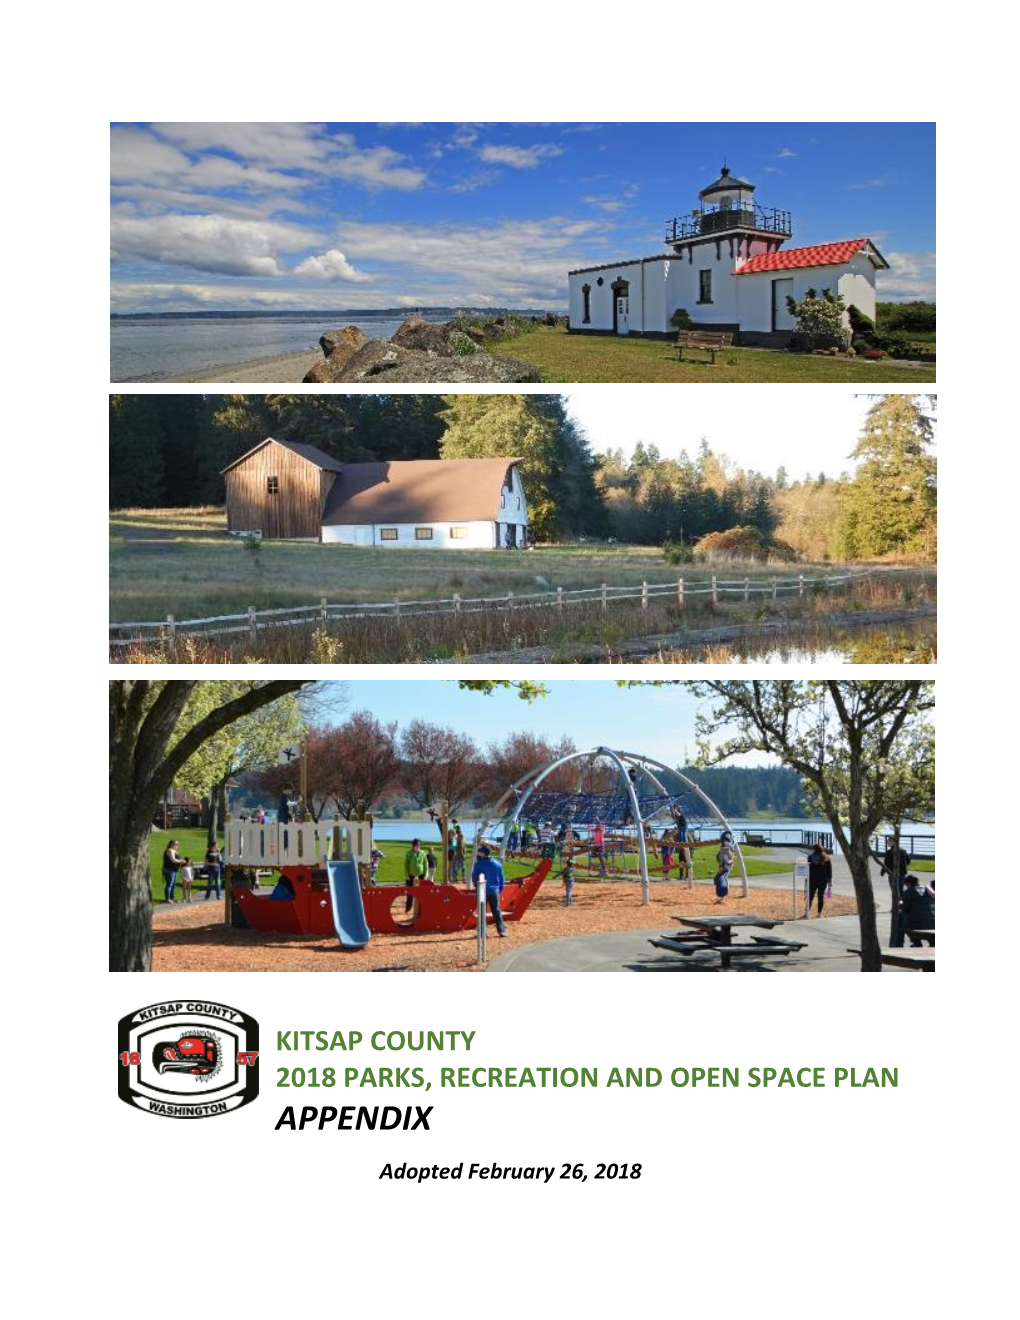 KITSAP COUNTY 2018 PARKS, RECREATION and OPEN SPACE PLAN APPENDIX Adopted February 26, 2018